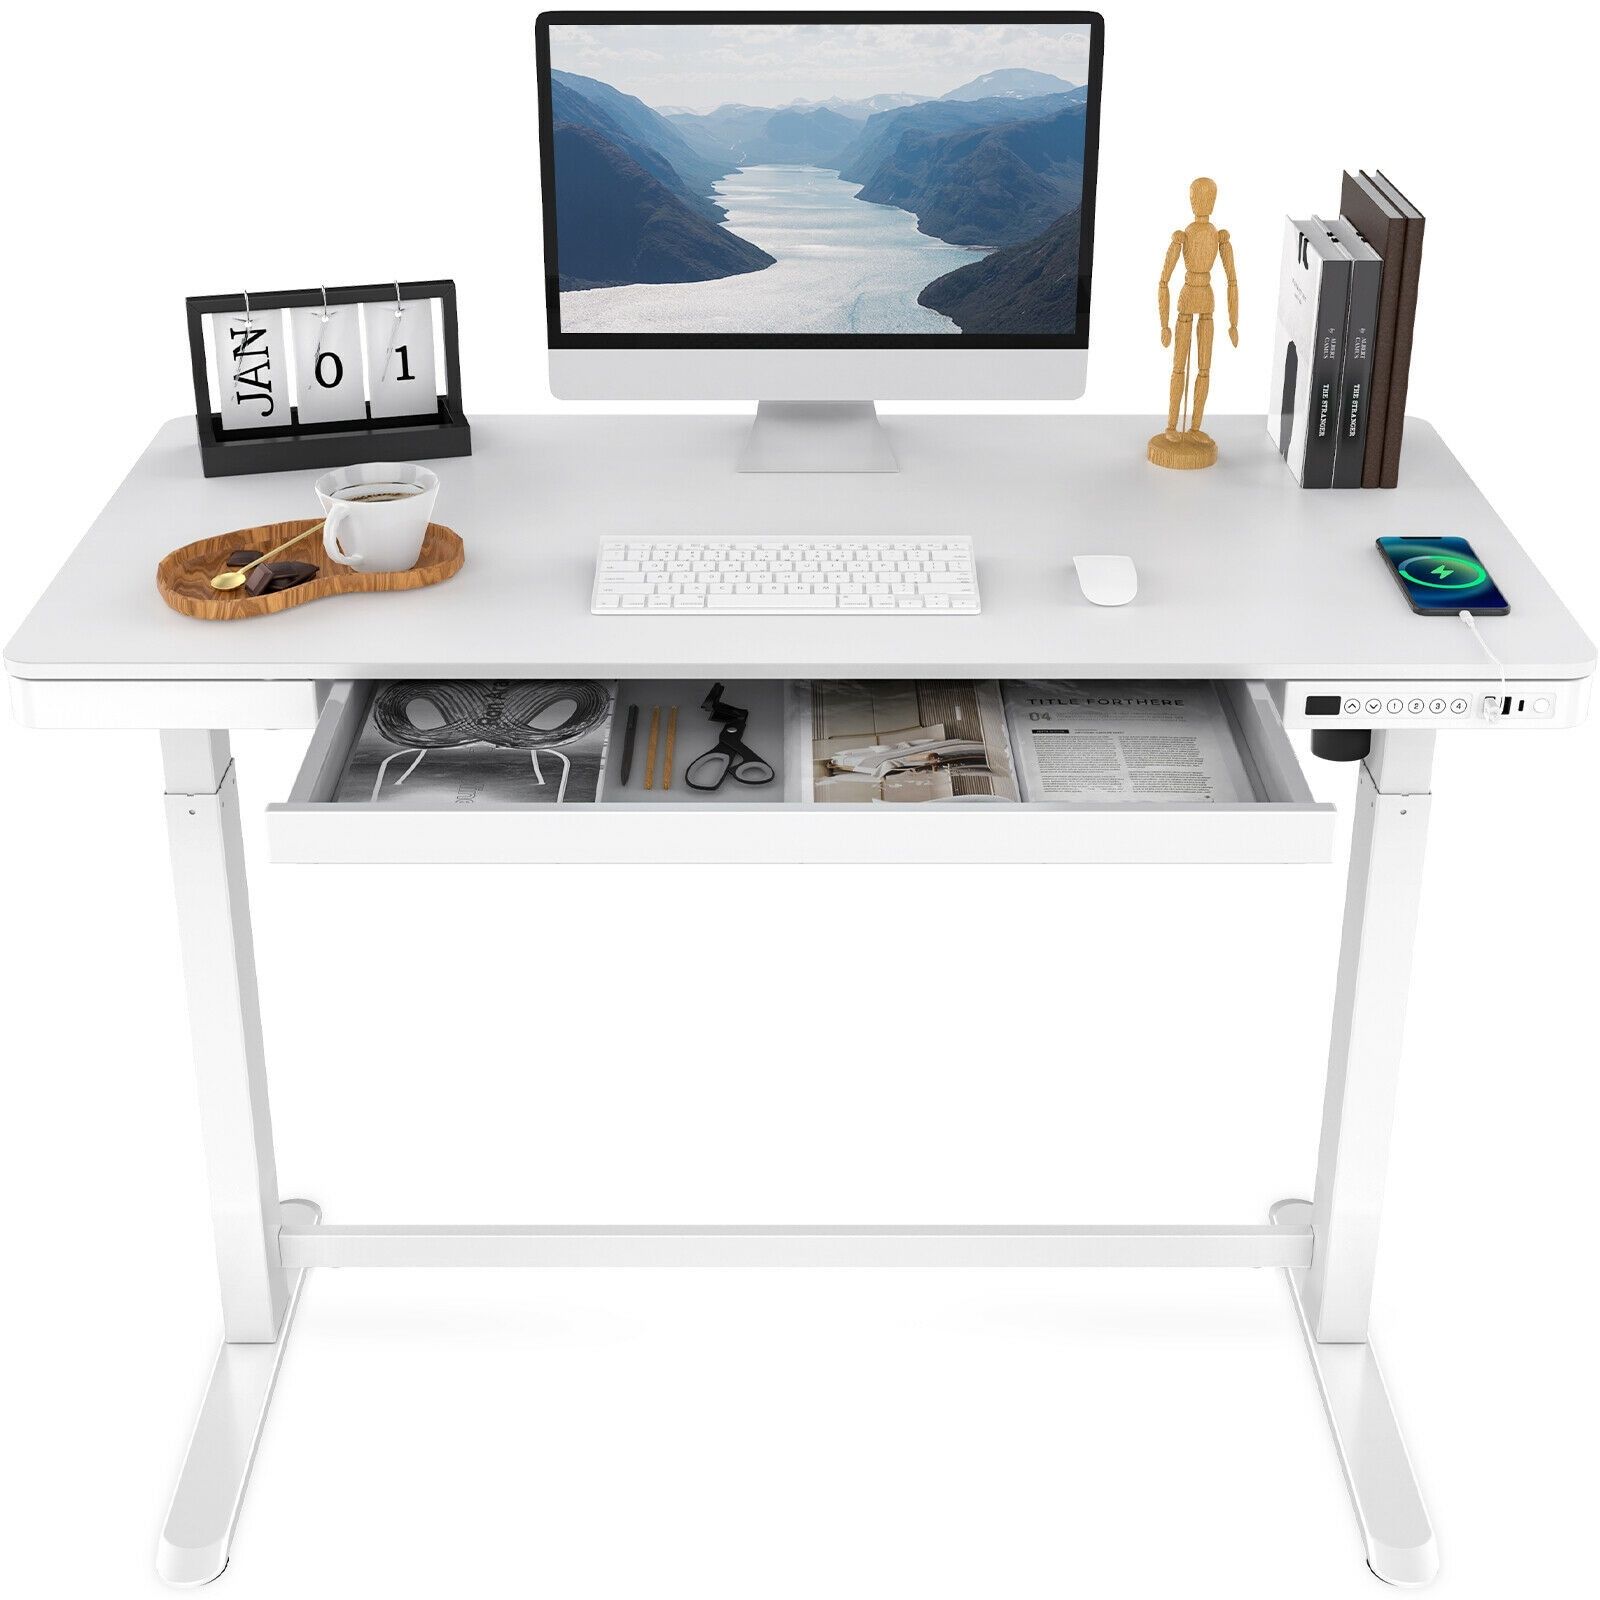 The Benefits of an Adjustable Height Computer Desk: Finding the Perfect Fit for Your Workspace